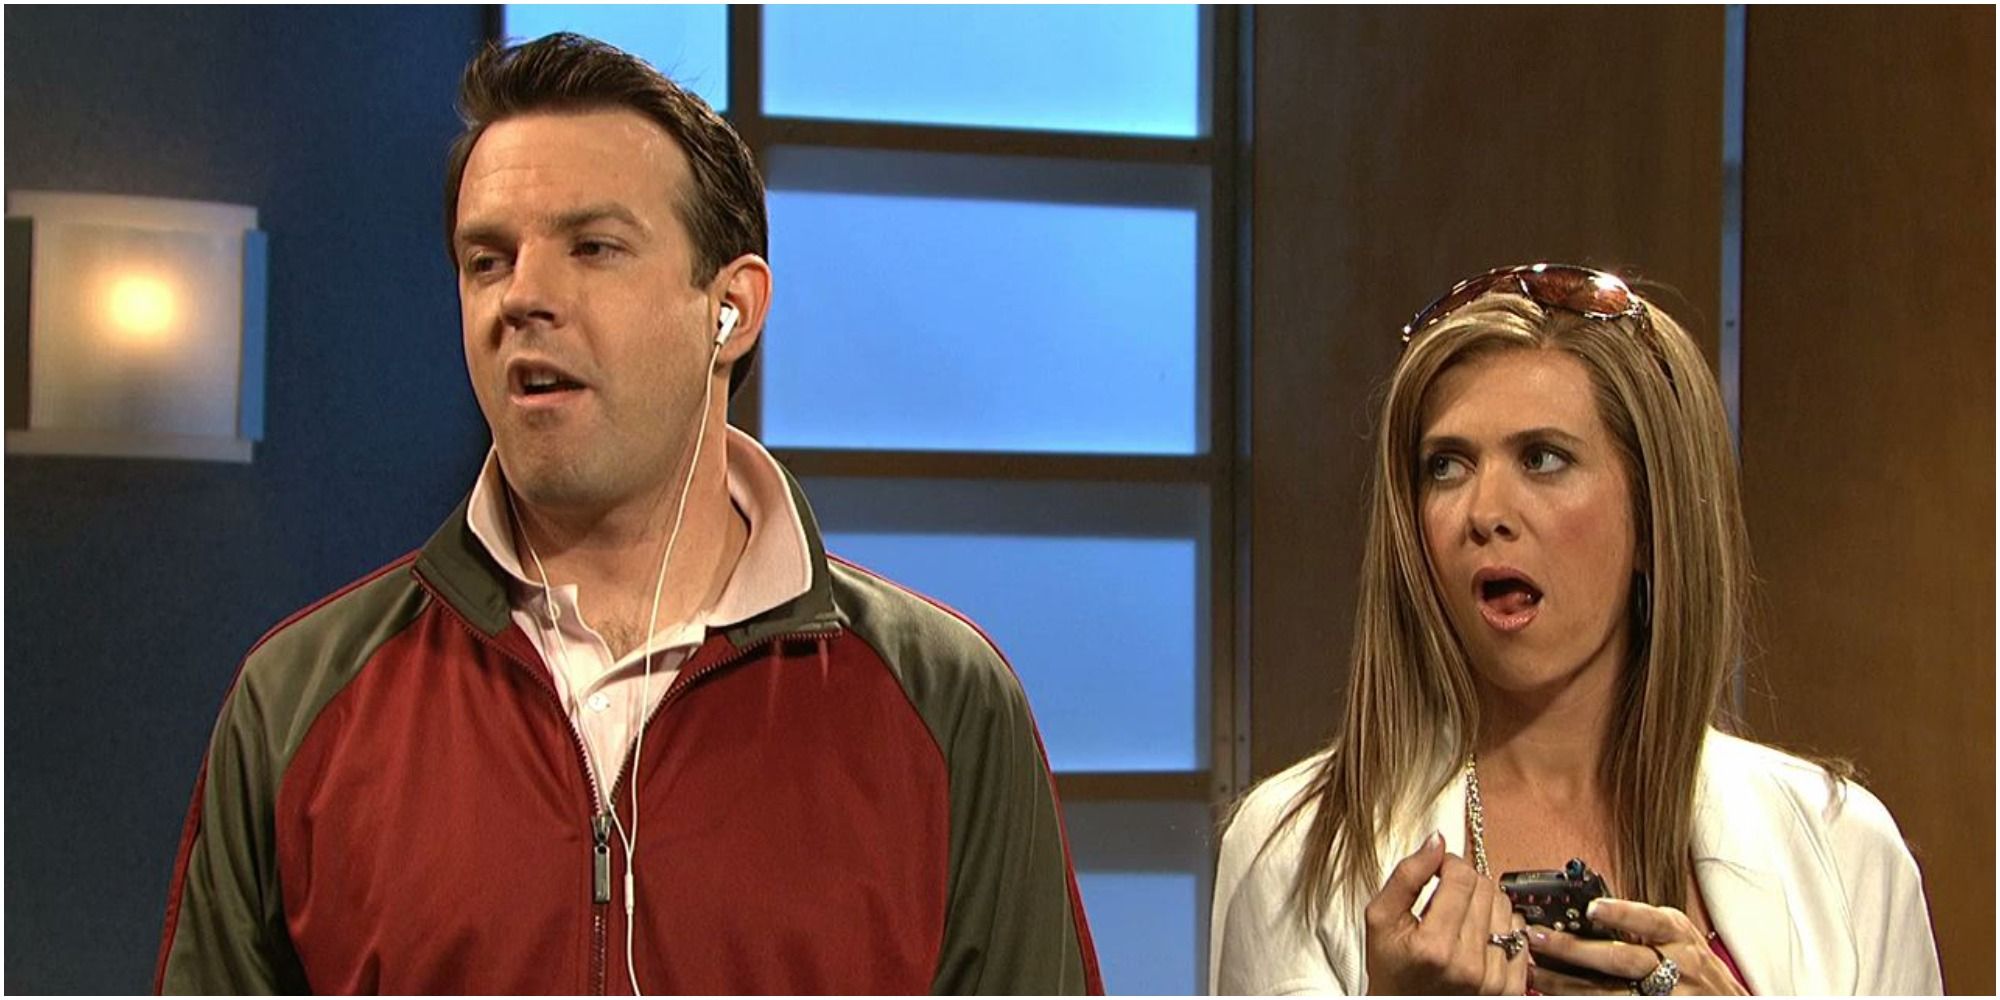 A screenshot of Jason Sudeikis and Kristen Wiig's Two A-Holes being ignorant in Saturday Night Live